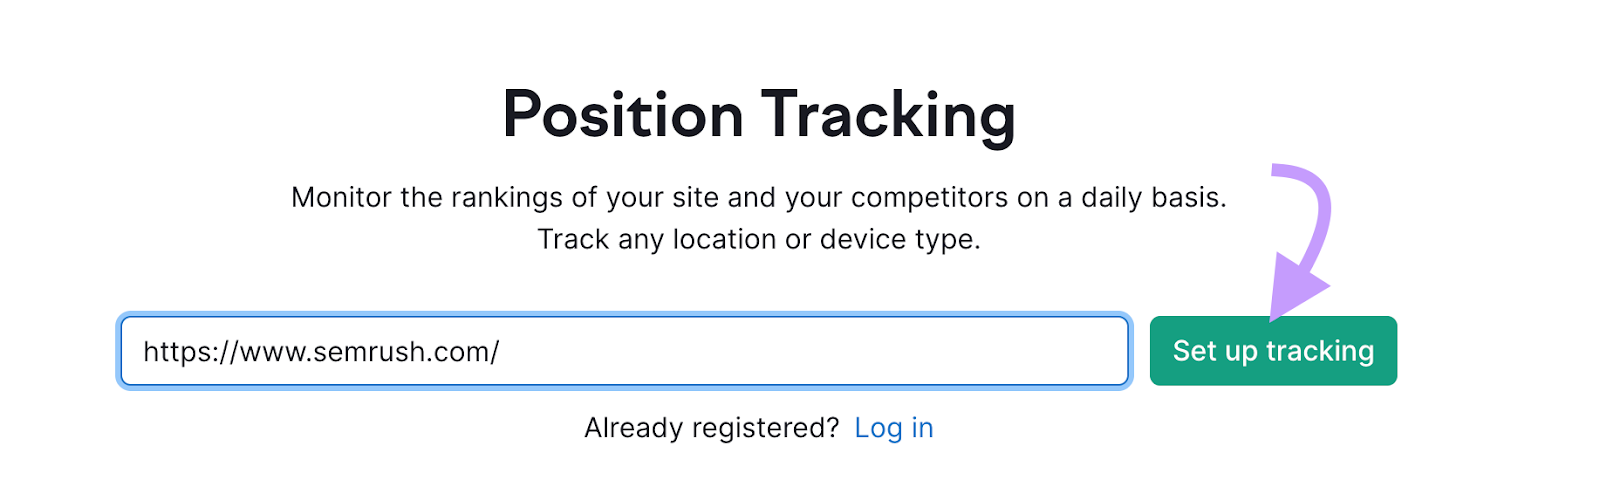 "https://www.semrush.com/" domain entered into the Position Tracking tool search bar